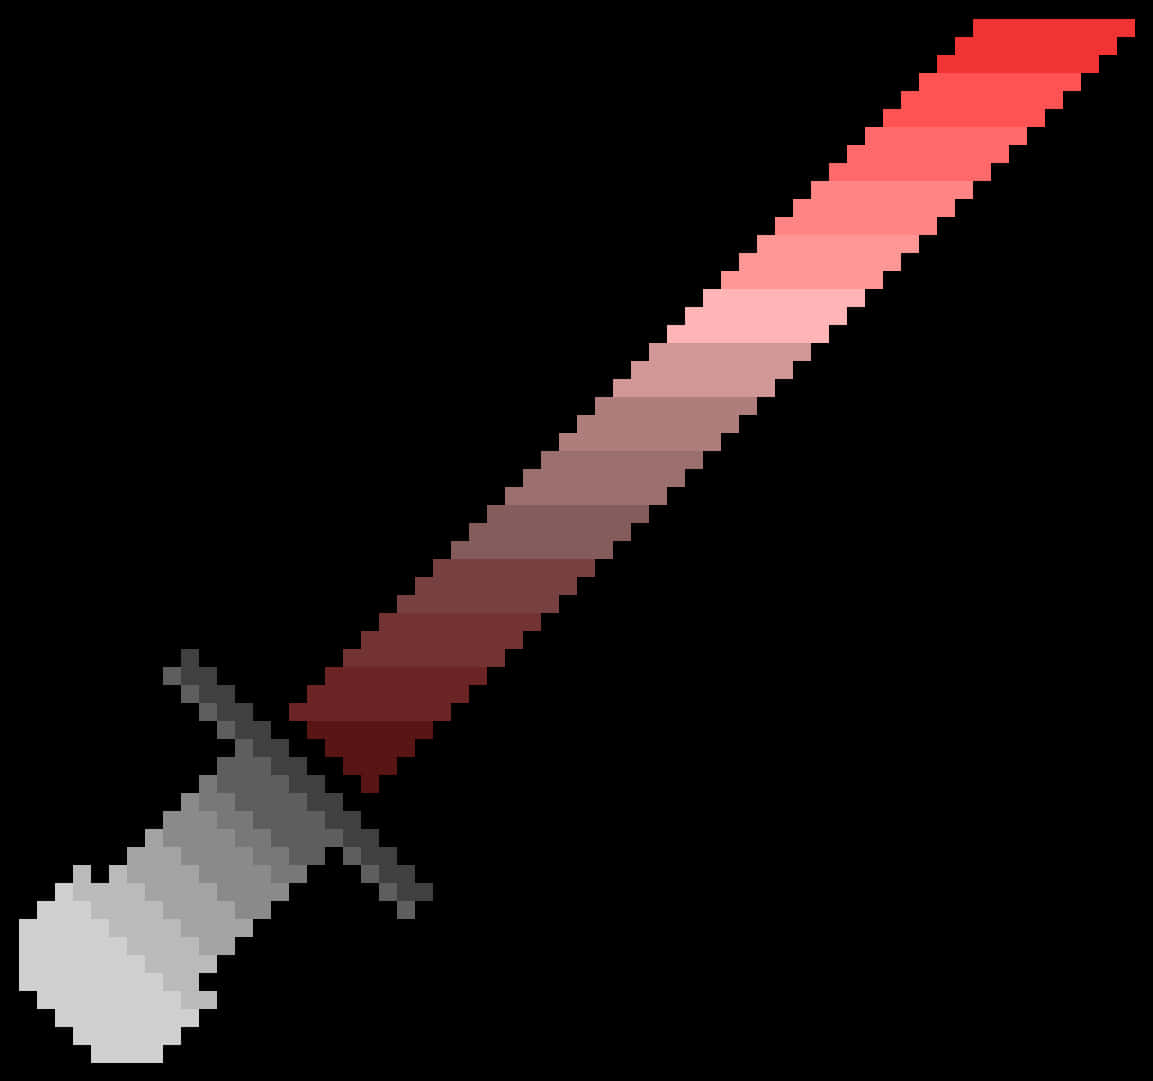 A Pixelated Sword With Red And White Color